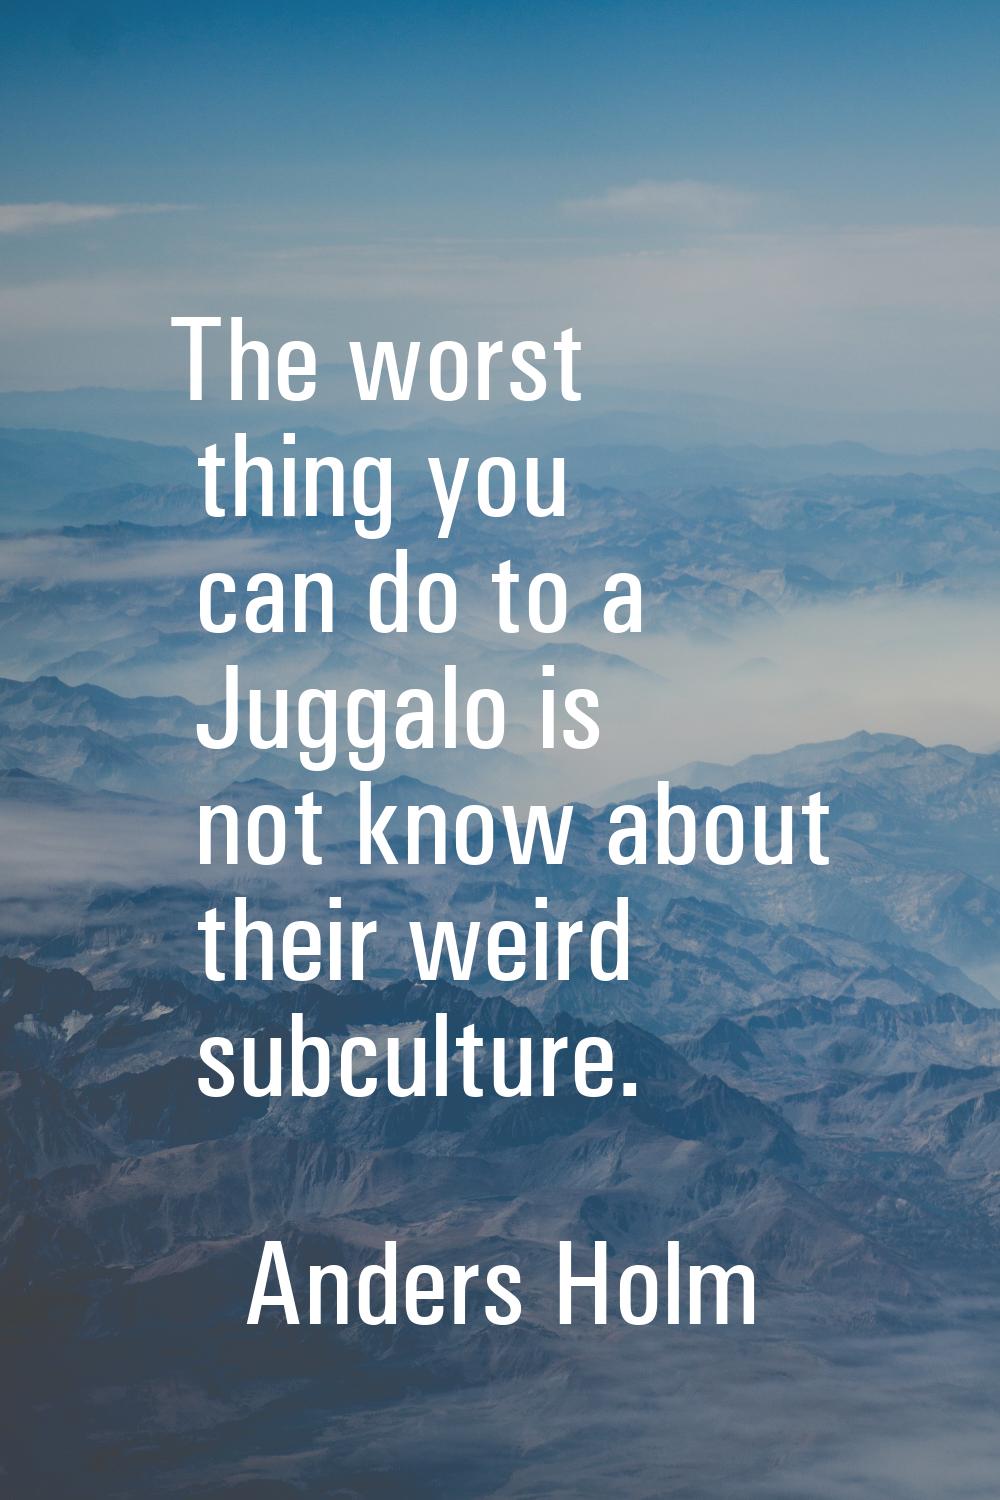 The worst thing you can do to a Juggalo is not know about their weird subculture.